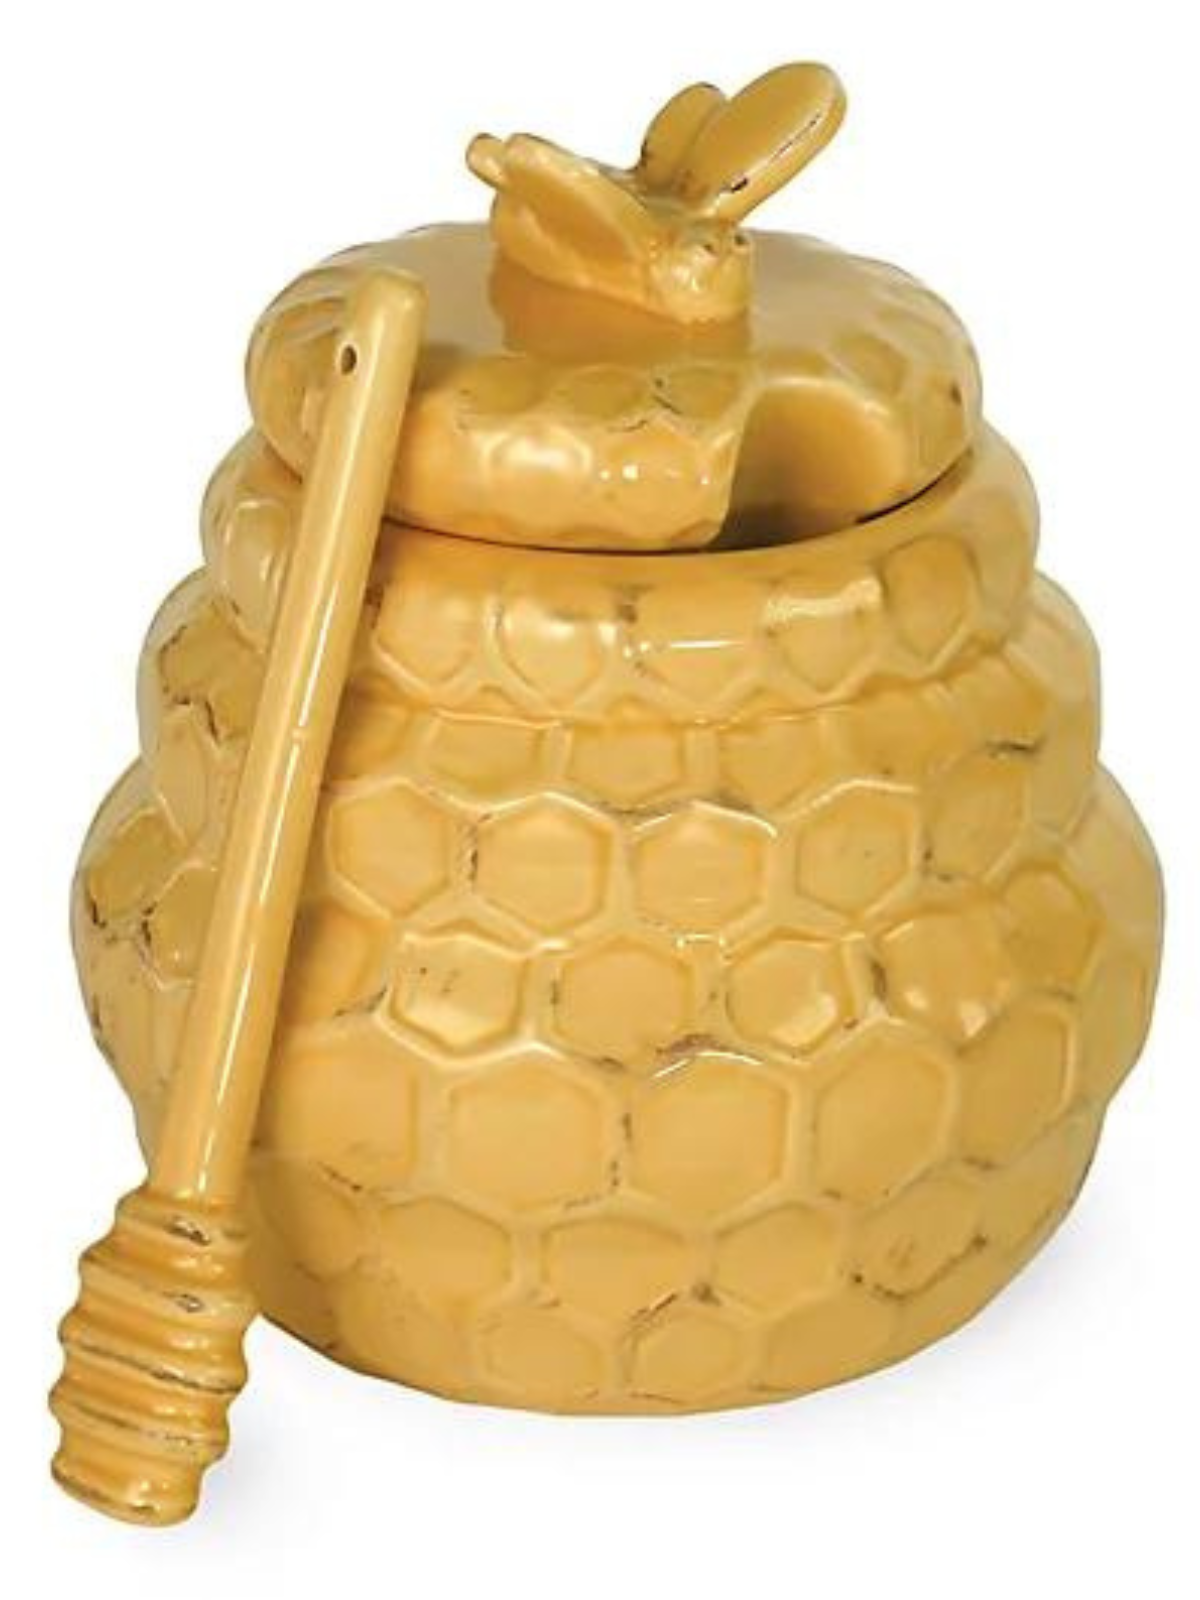 Make a bold statement with this charming Honeycomb Pot and Dipper Set. Crafted in durable ceramic, each dark yellow piece is embossed with a honeycomb pattern and a bee. Light distressing completes this buzz-worthy look.  